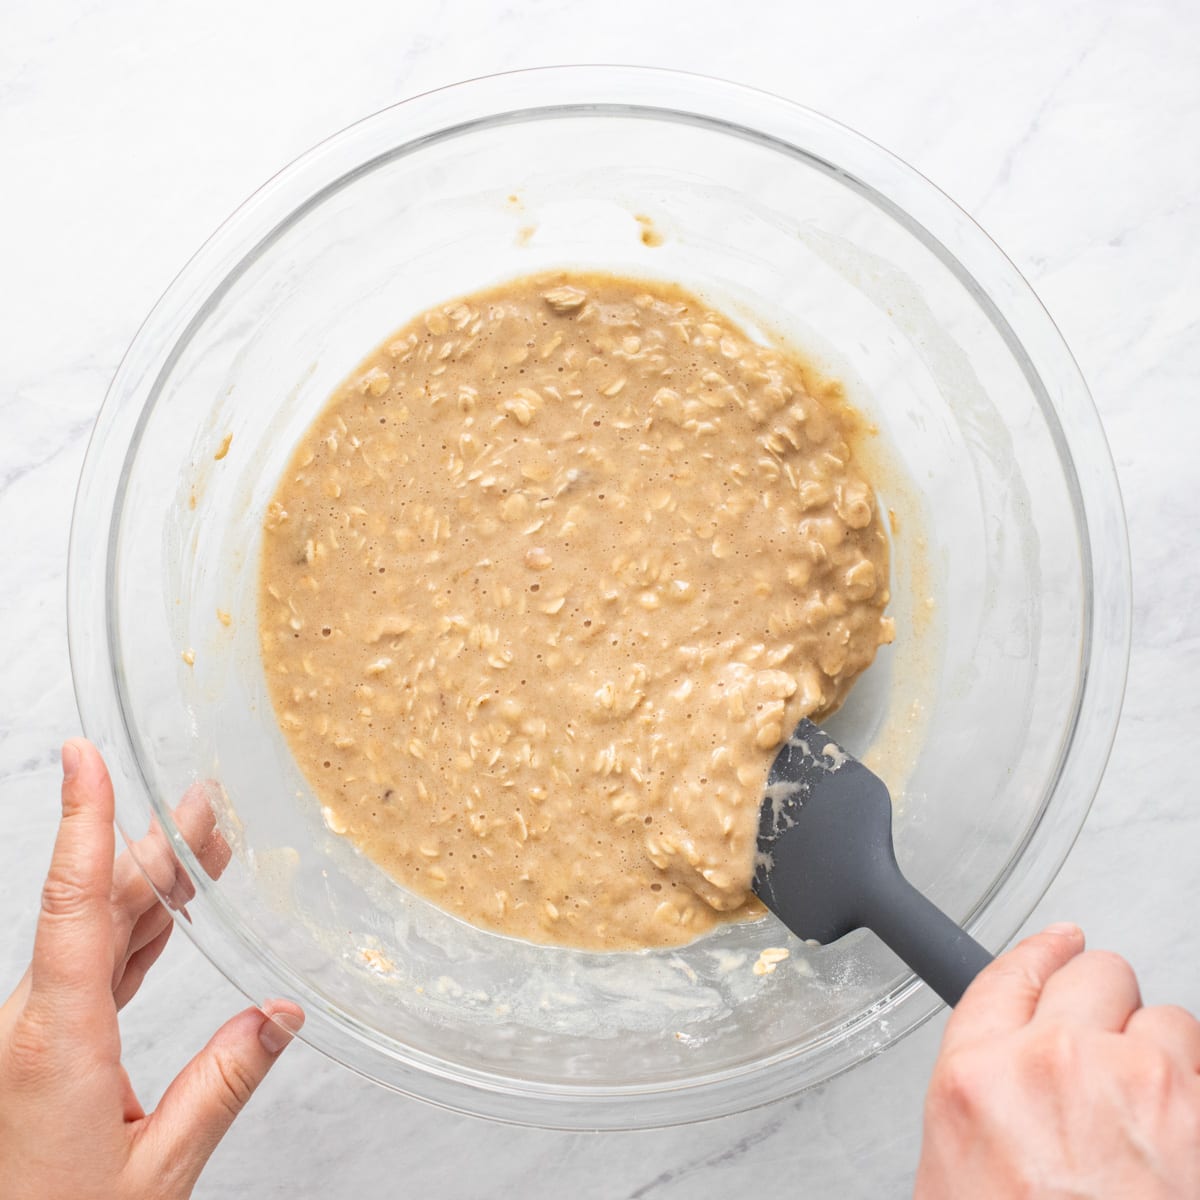 The side of the bowl containing the batter is being scraped with a spatula to get any lingering unmixed ingredients.